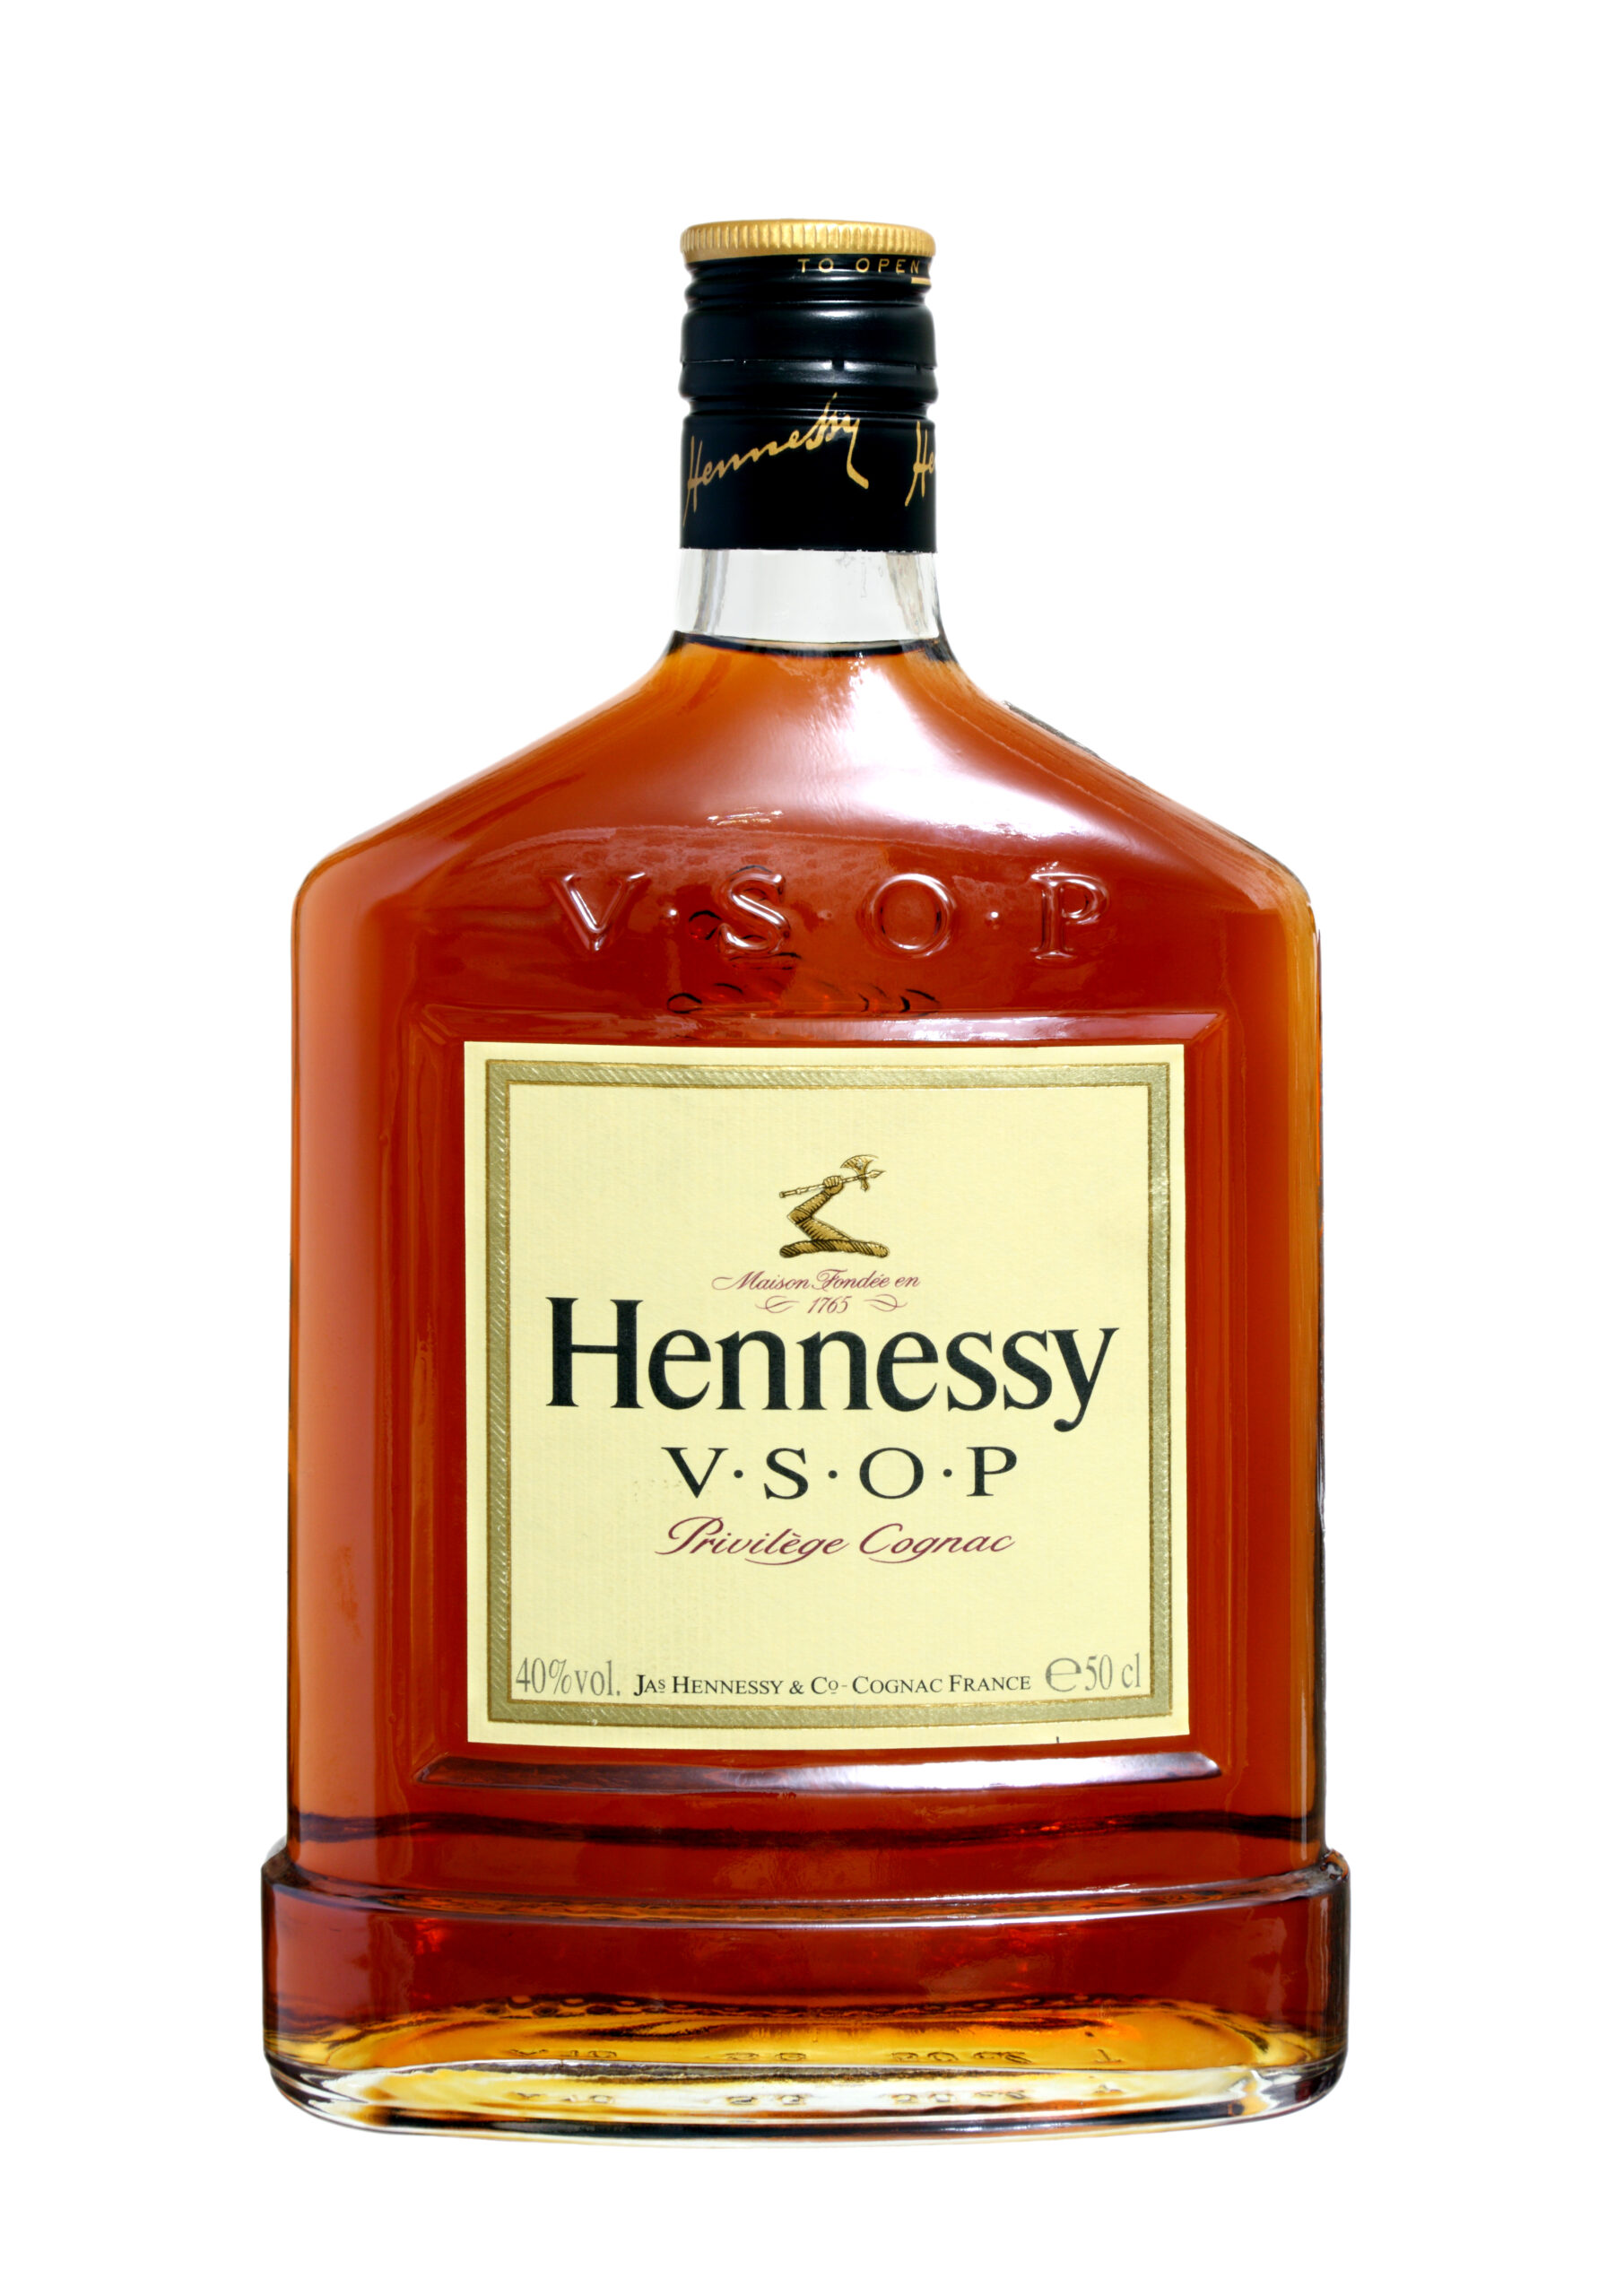 Moet Hennessy struggles to keep up with cognac demand - Drinks Trade